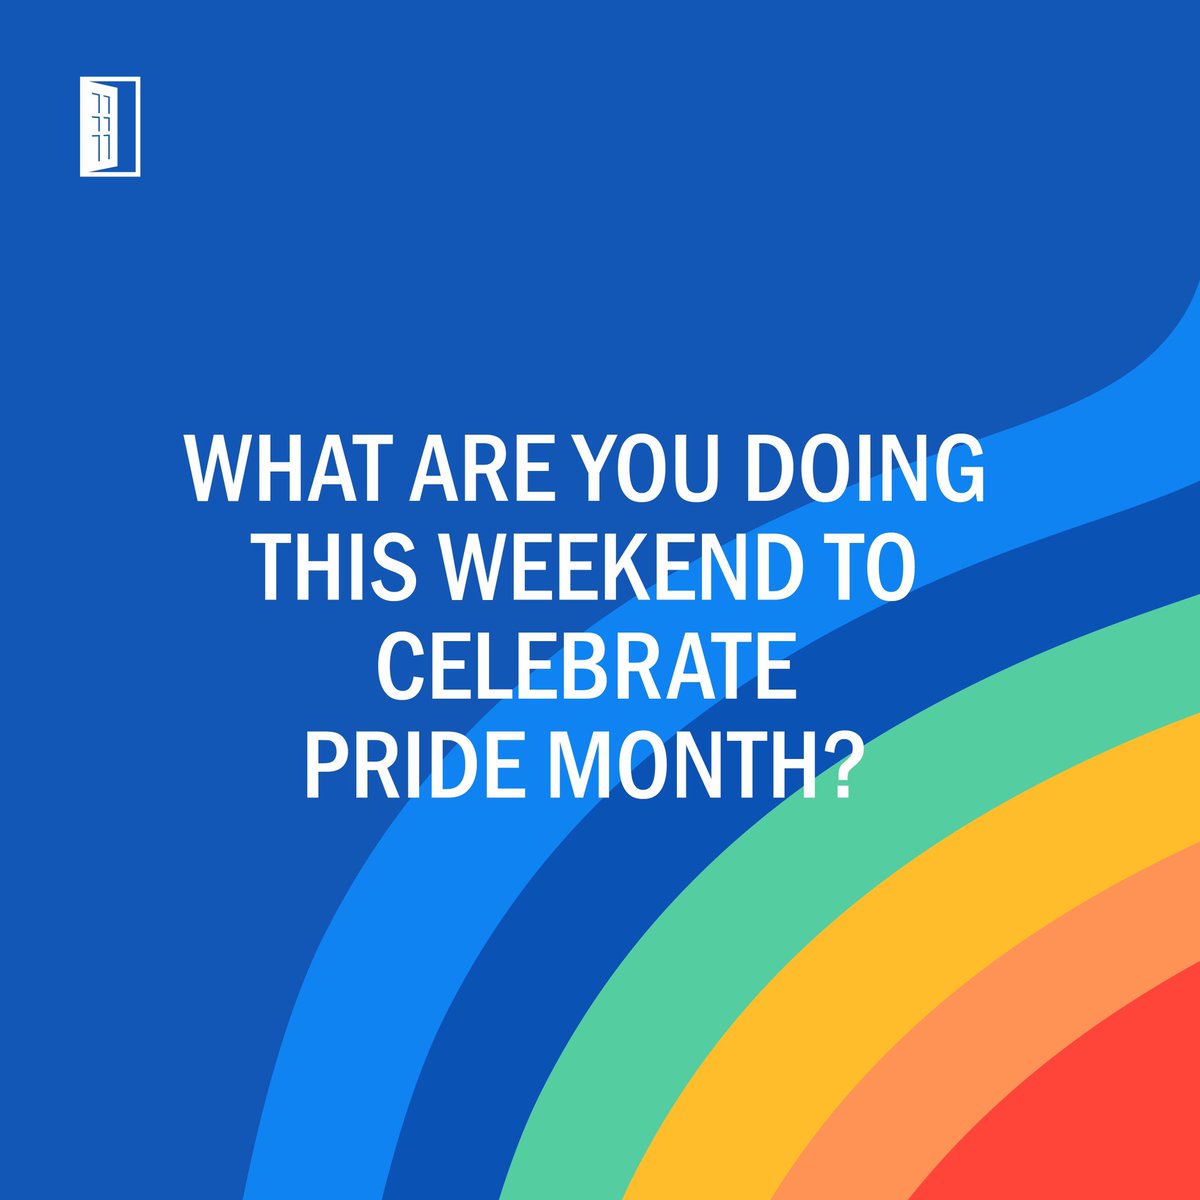 There are so many events happening across L.A. to celebrate Pride Month! 💙

What are your plans?! Let us know 📣